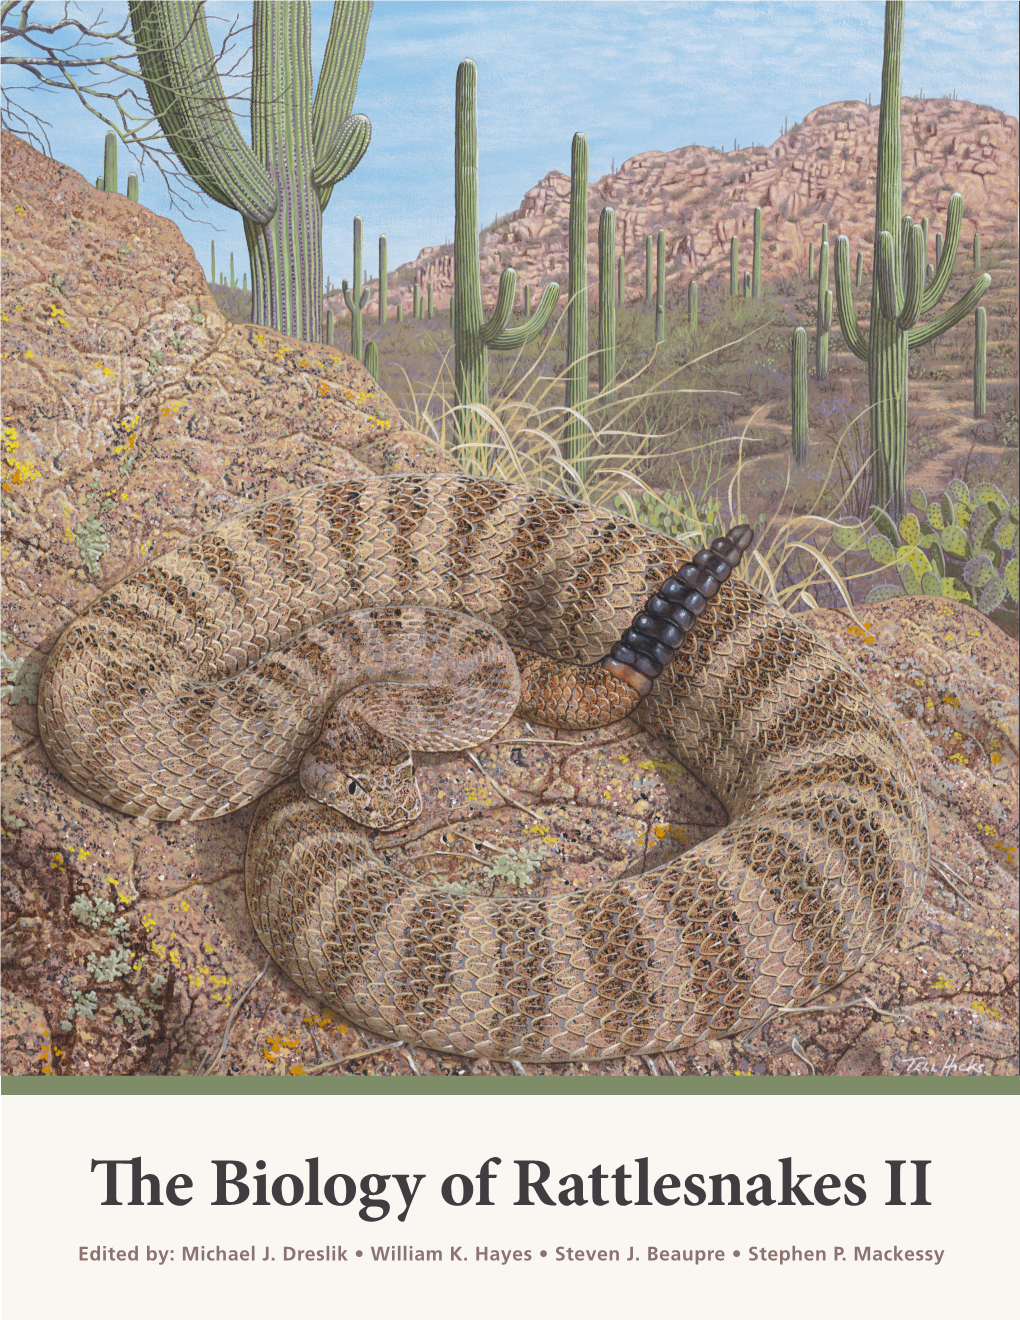 The Biology of Rattlesnakes II Edited By: Michael J